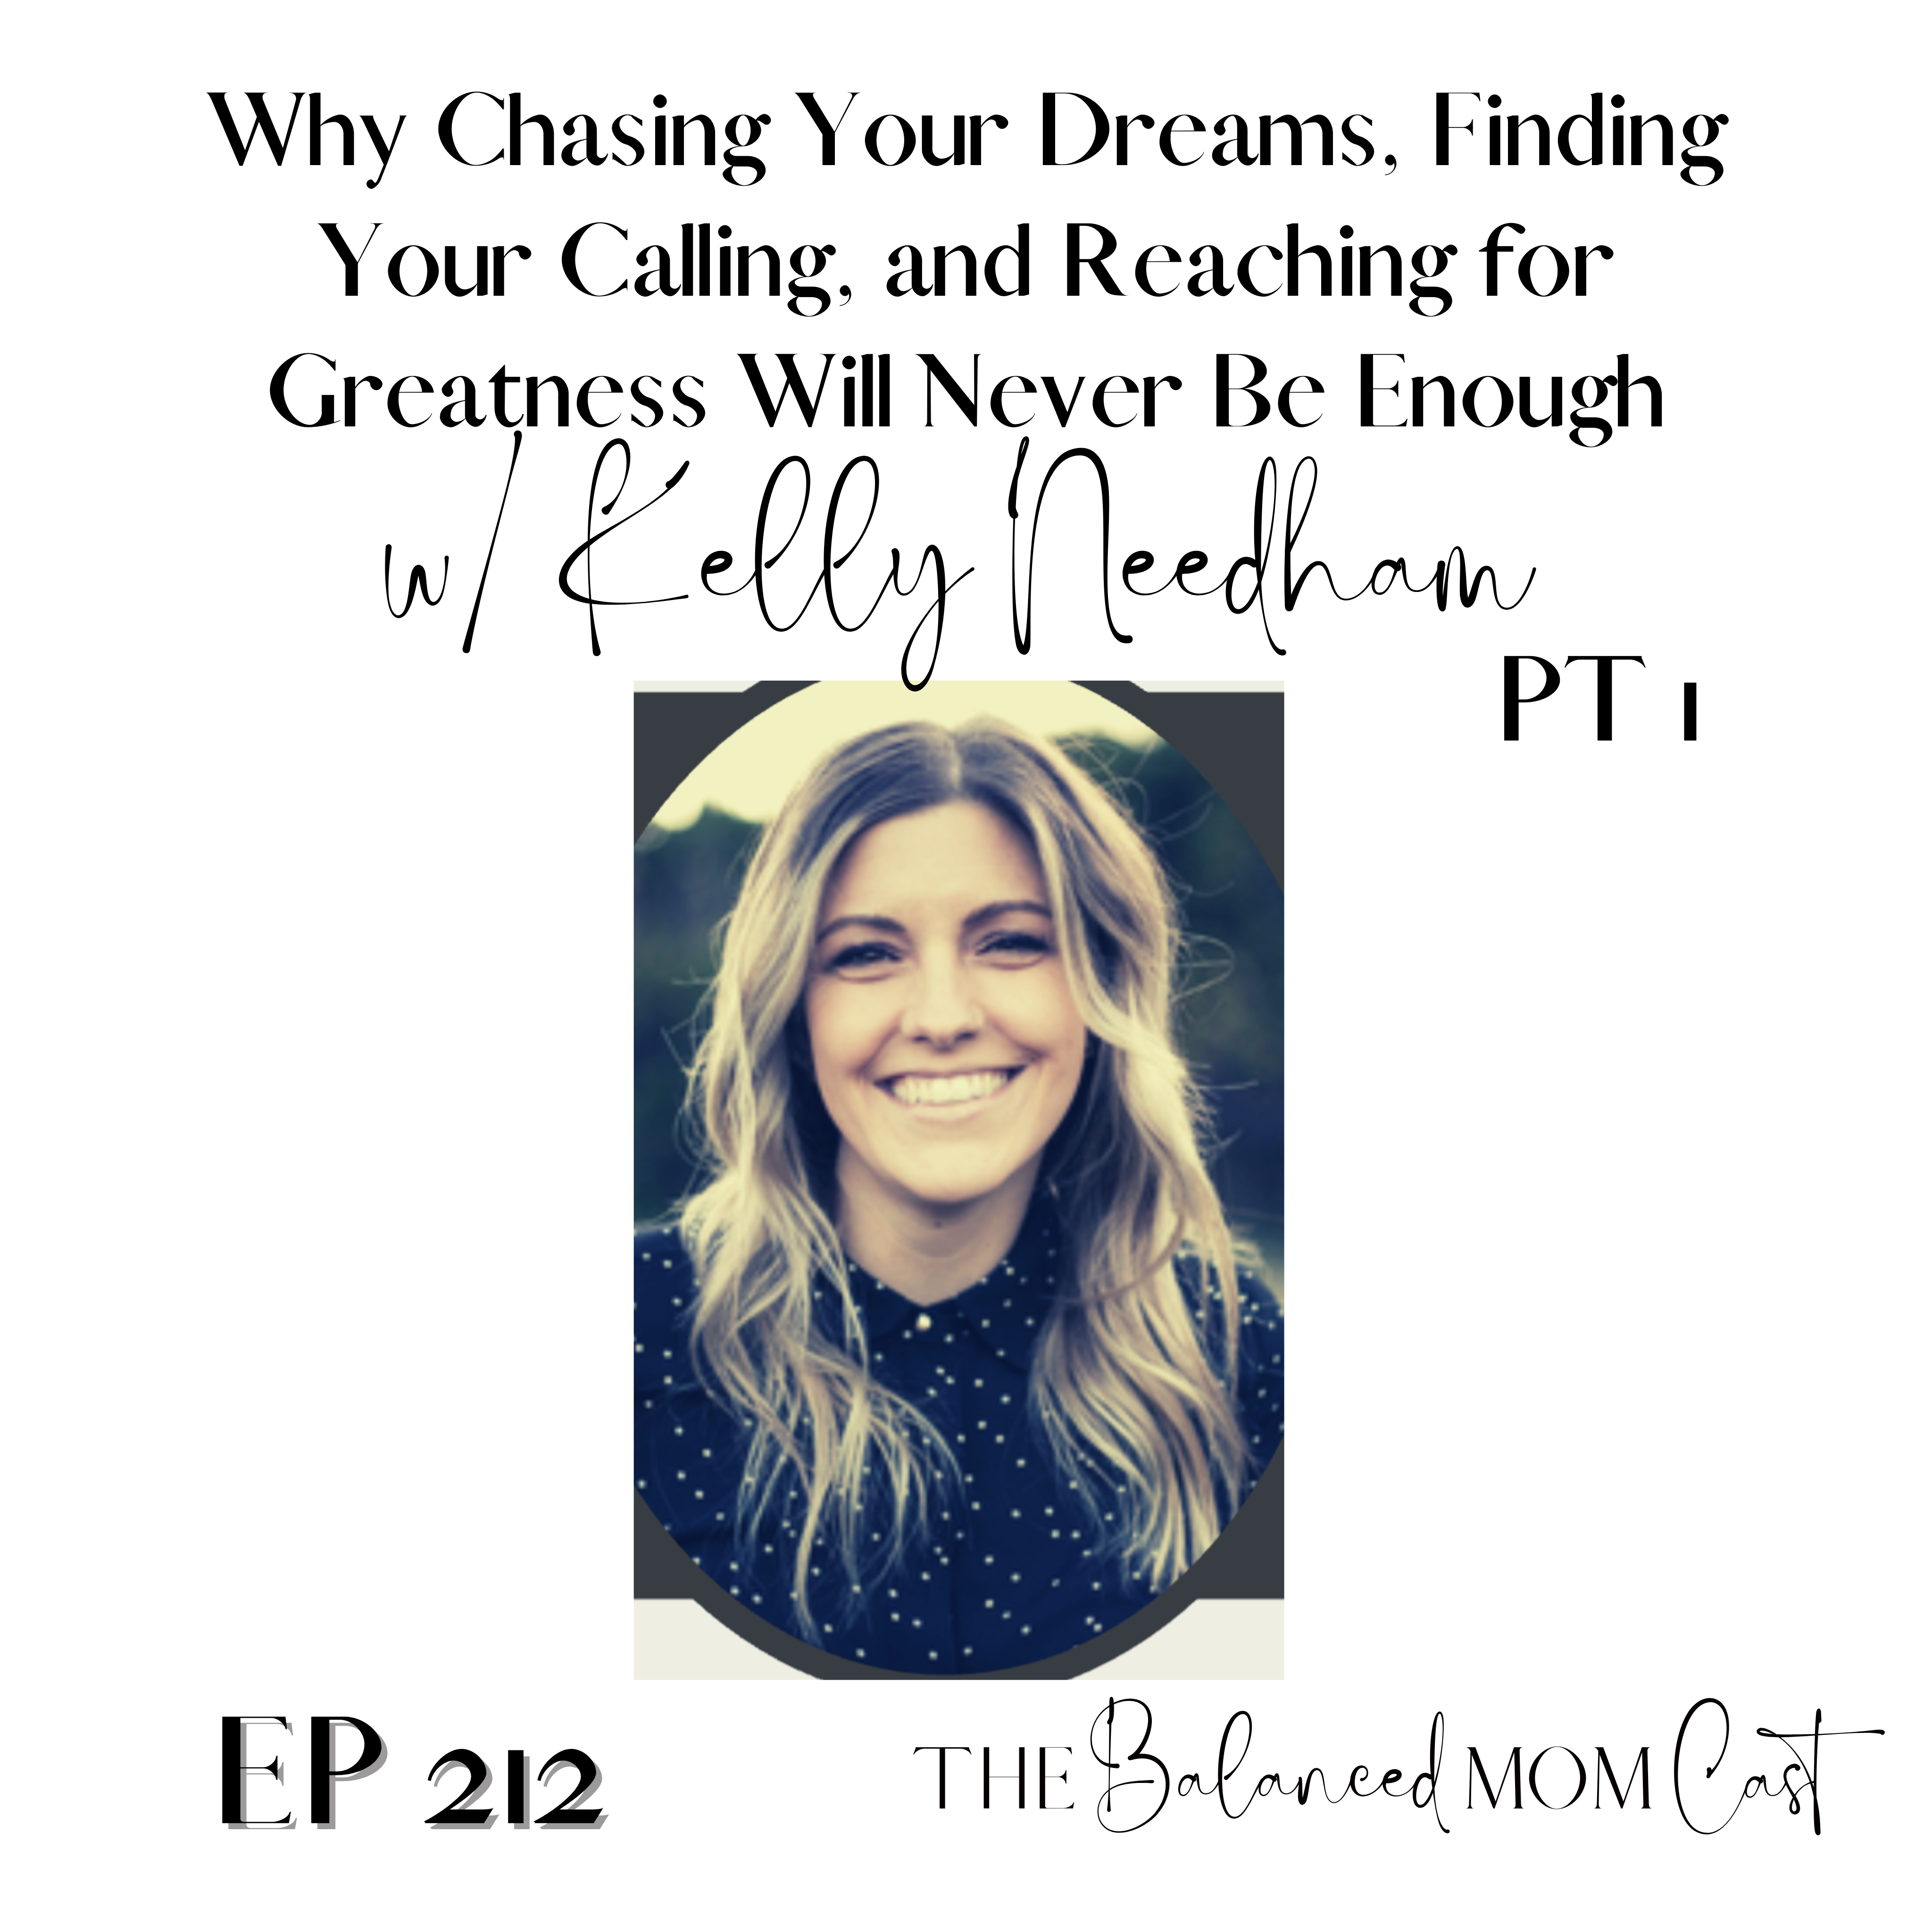 Ep 212: Why Chasing Your Dreams, Finding Your Calling, and Reaching for Greatness Will Never Be Enough w/ Kelly Needham, Pt.1